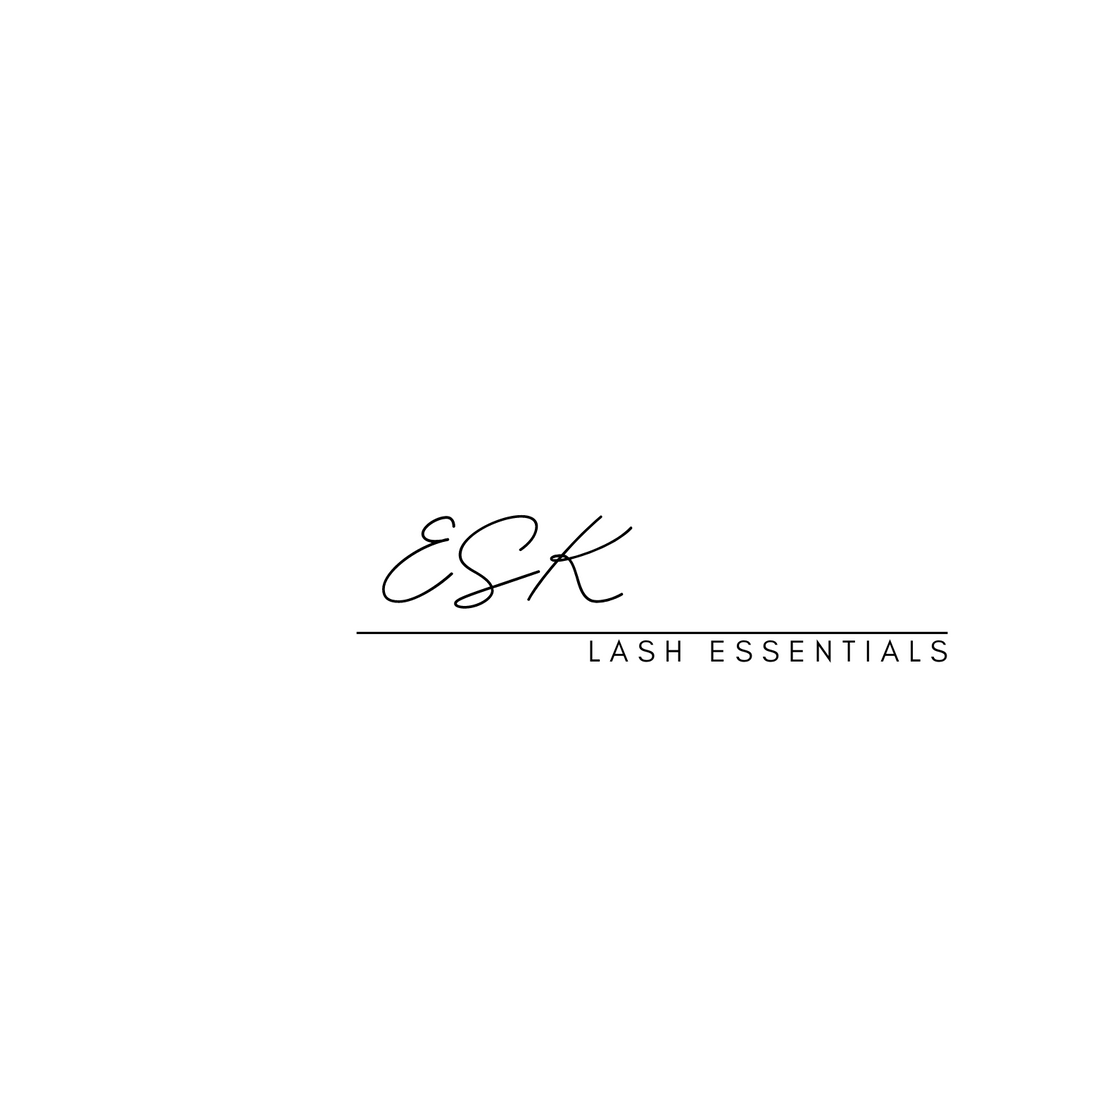 Lash Extension Aftercare, brought to you by ESK Eyelash Extension Essentials | ESK eyelash extension products and supplies